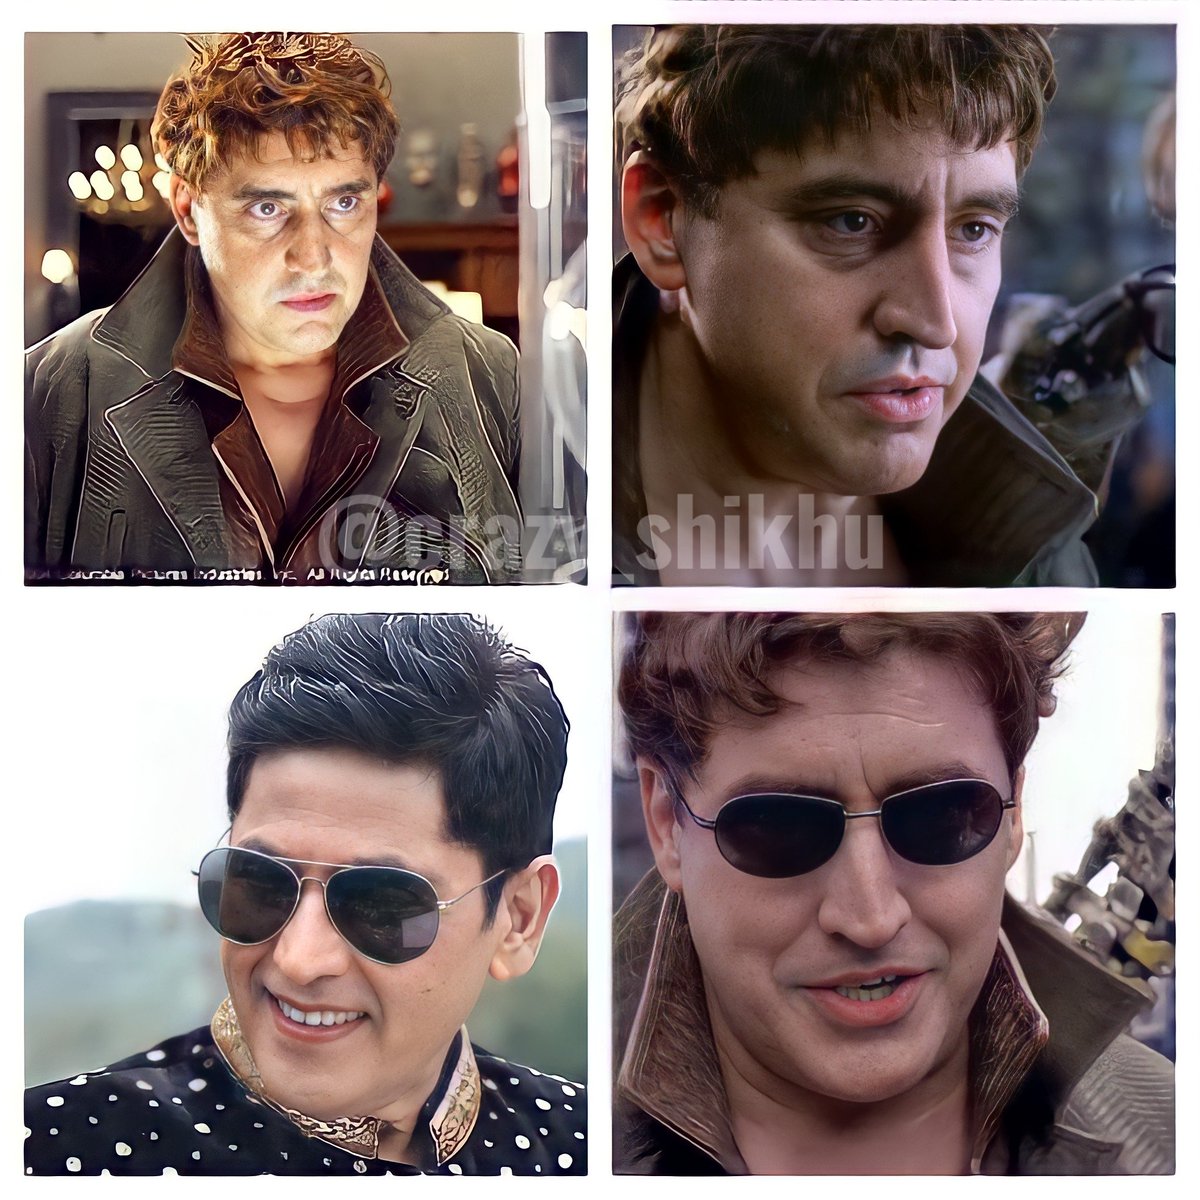 RT @crazy_shikhu: Alfred Molina was amazing as Doctor Octopus in Spider-man 2 https://t.co/Vy4RmTssiP